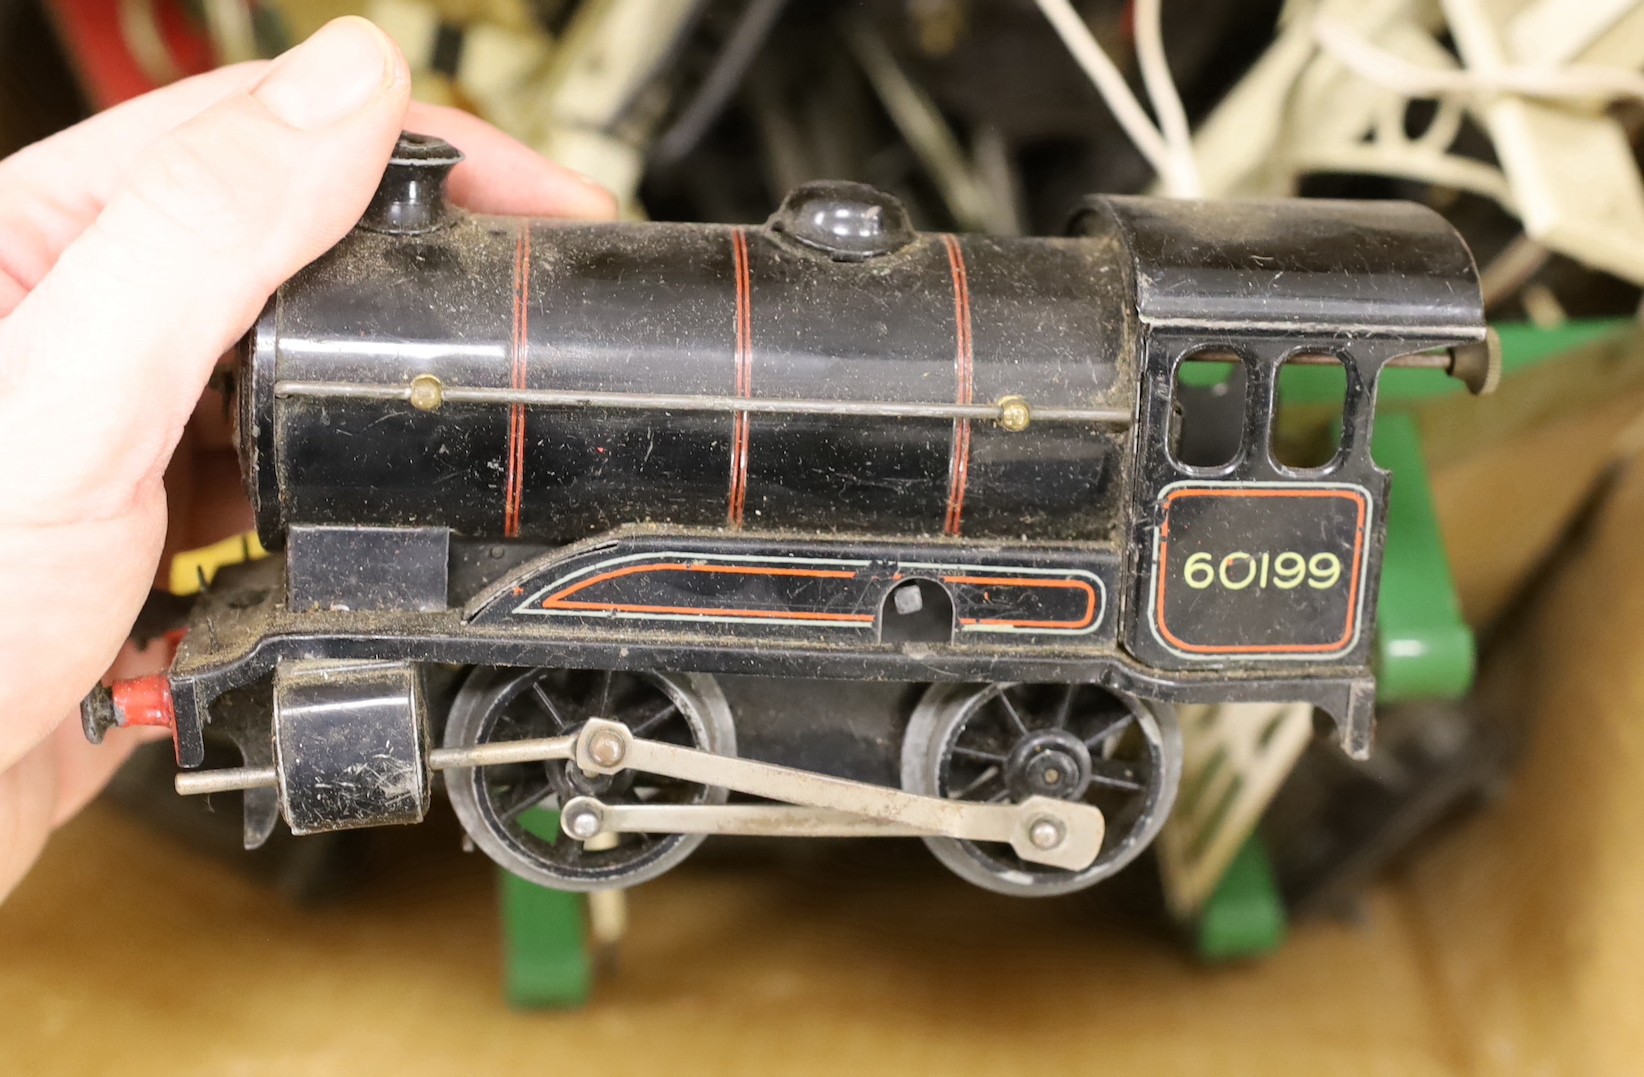 A Dublo Hornby locomotive, a quantity of tack etc and a Walt Disney made in Britain tin windup toy of Mickey Mouse and Donald Duck